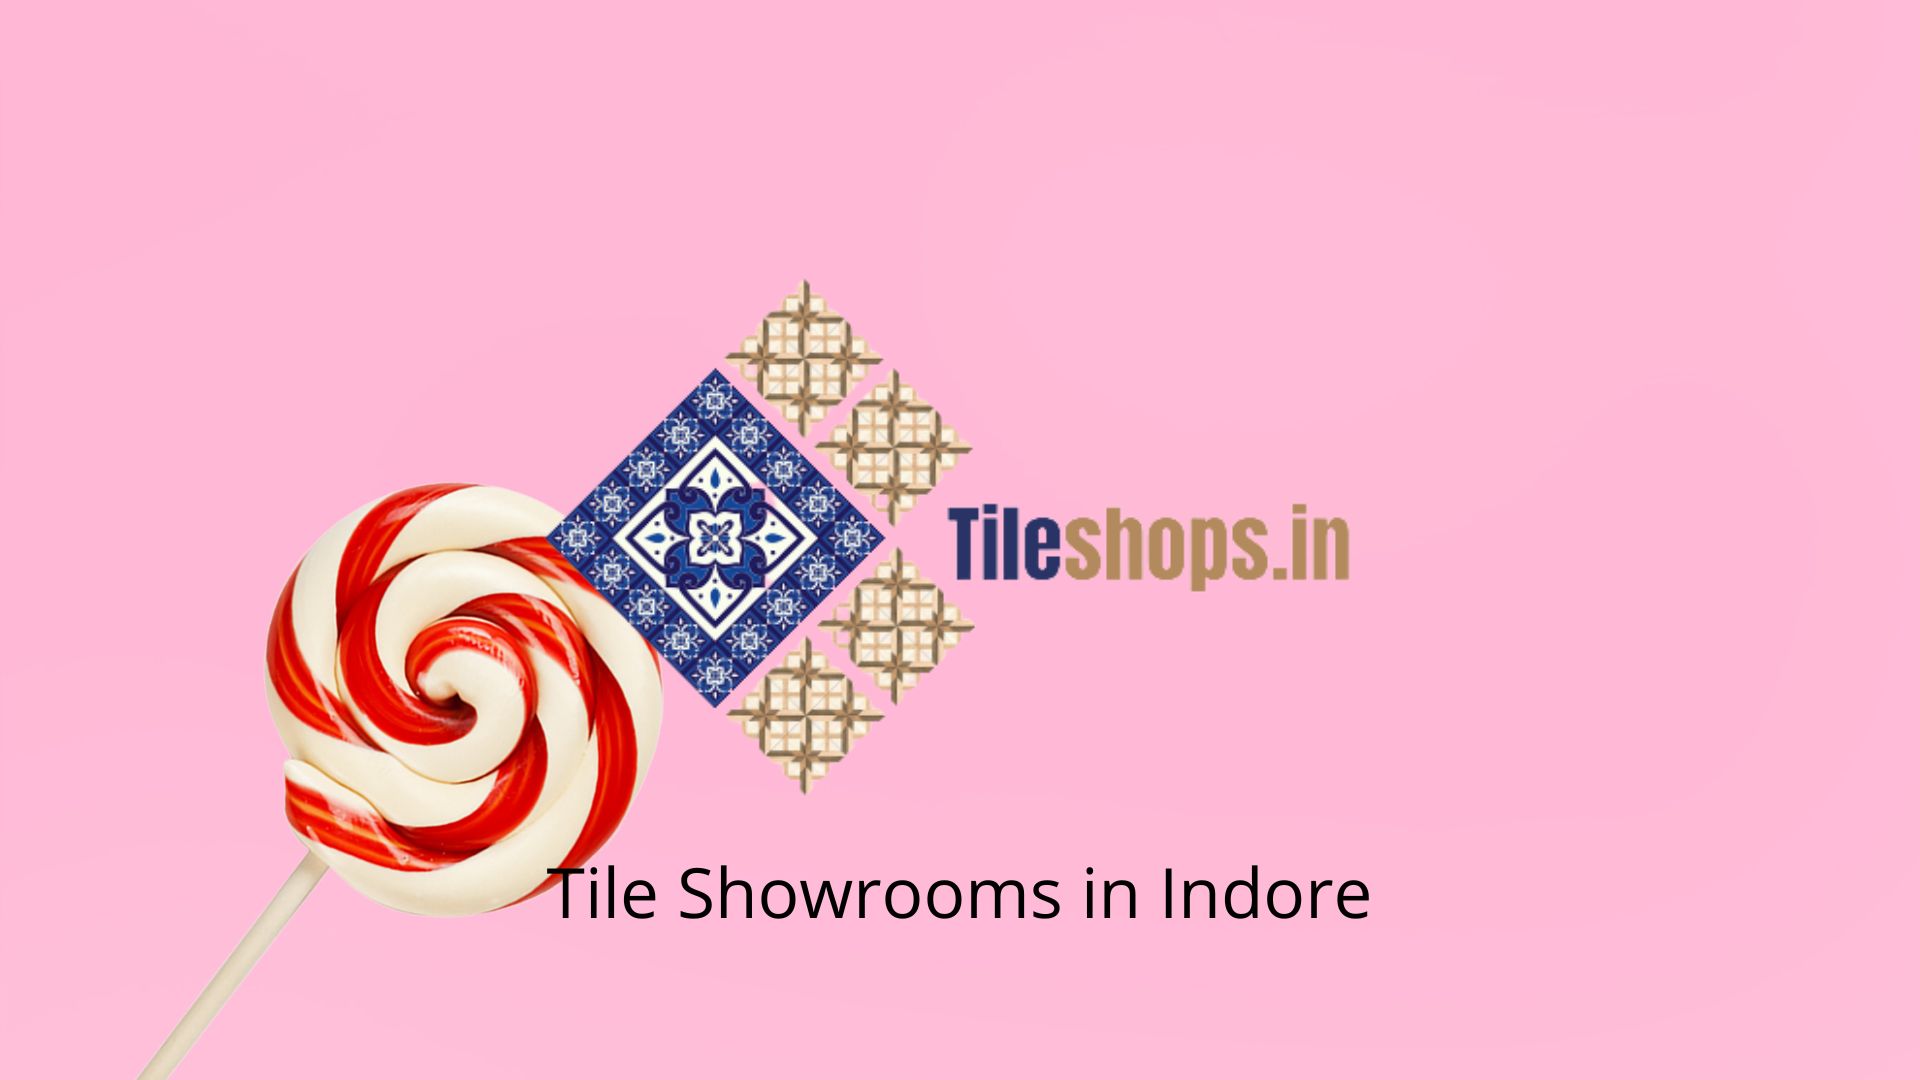 Tile Showrooms in Indore